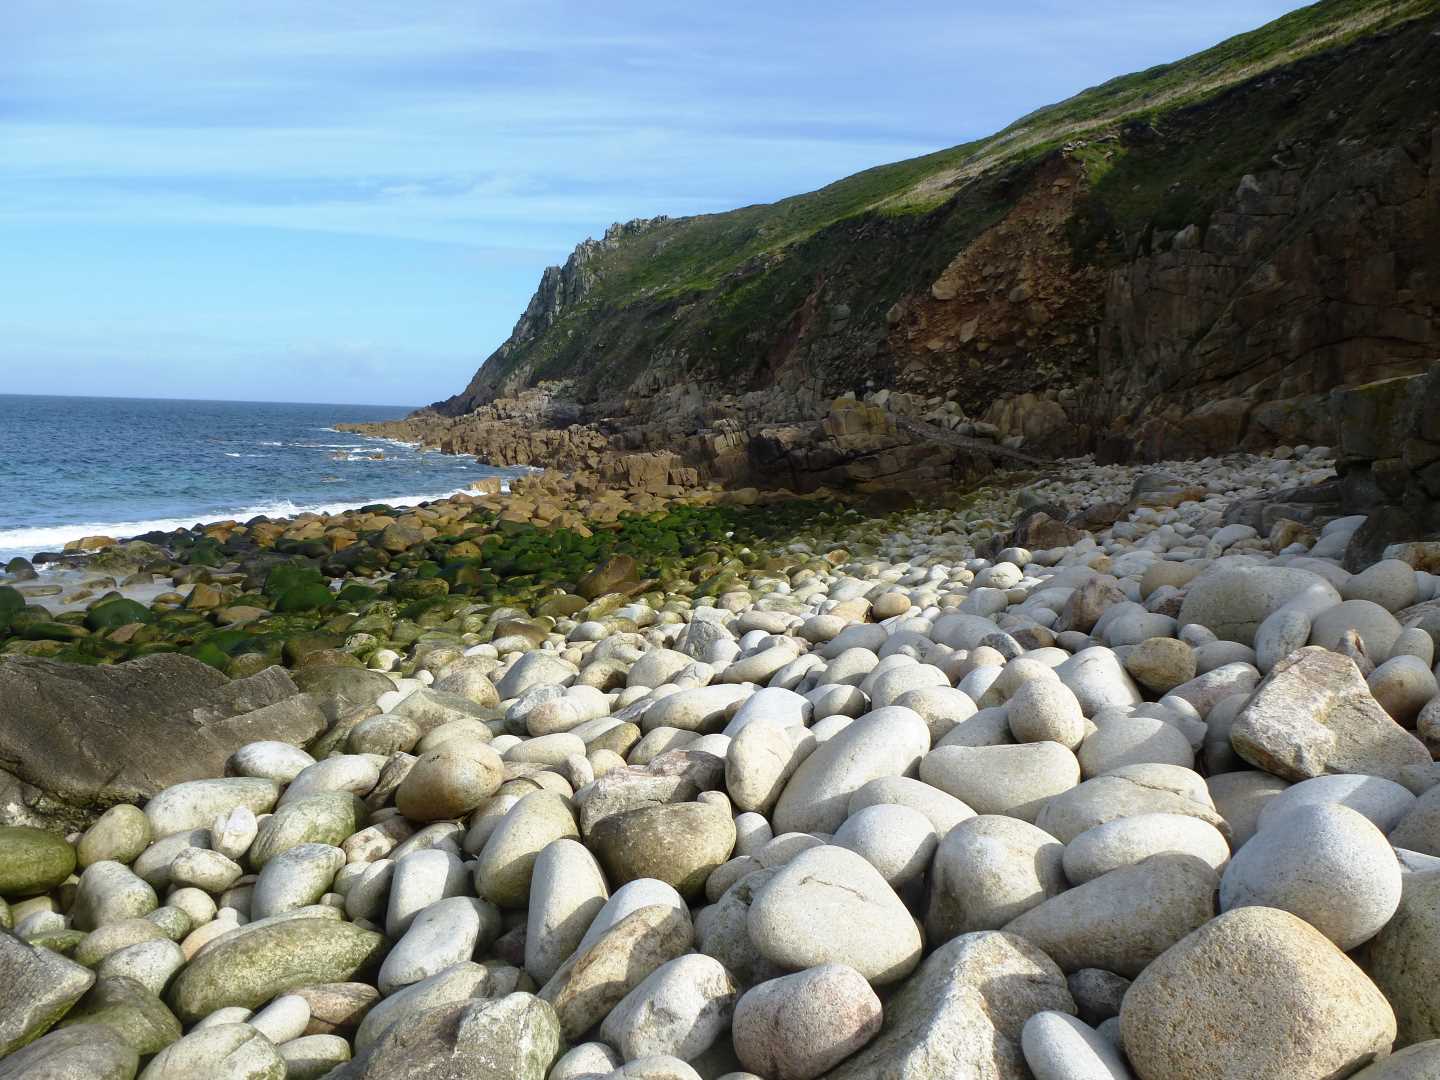 A rocky beach with seaweed covering some of the rocks